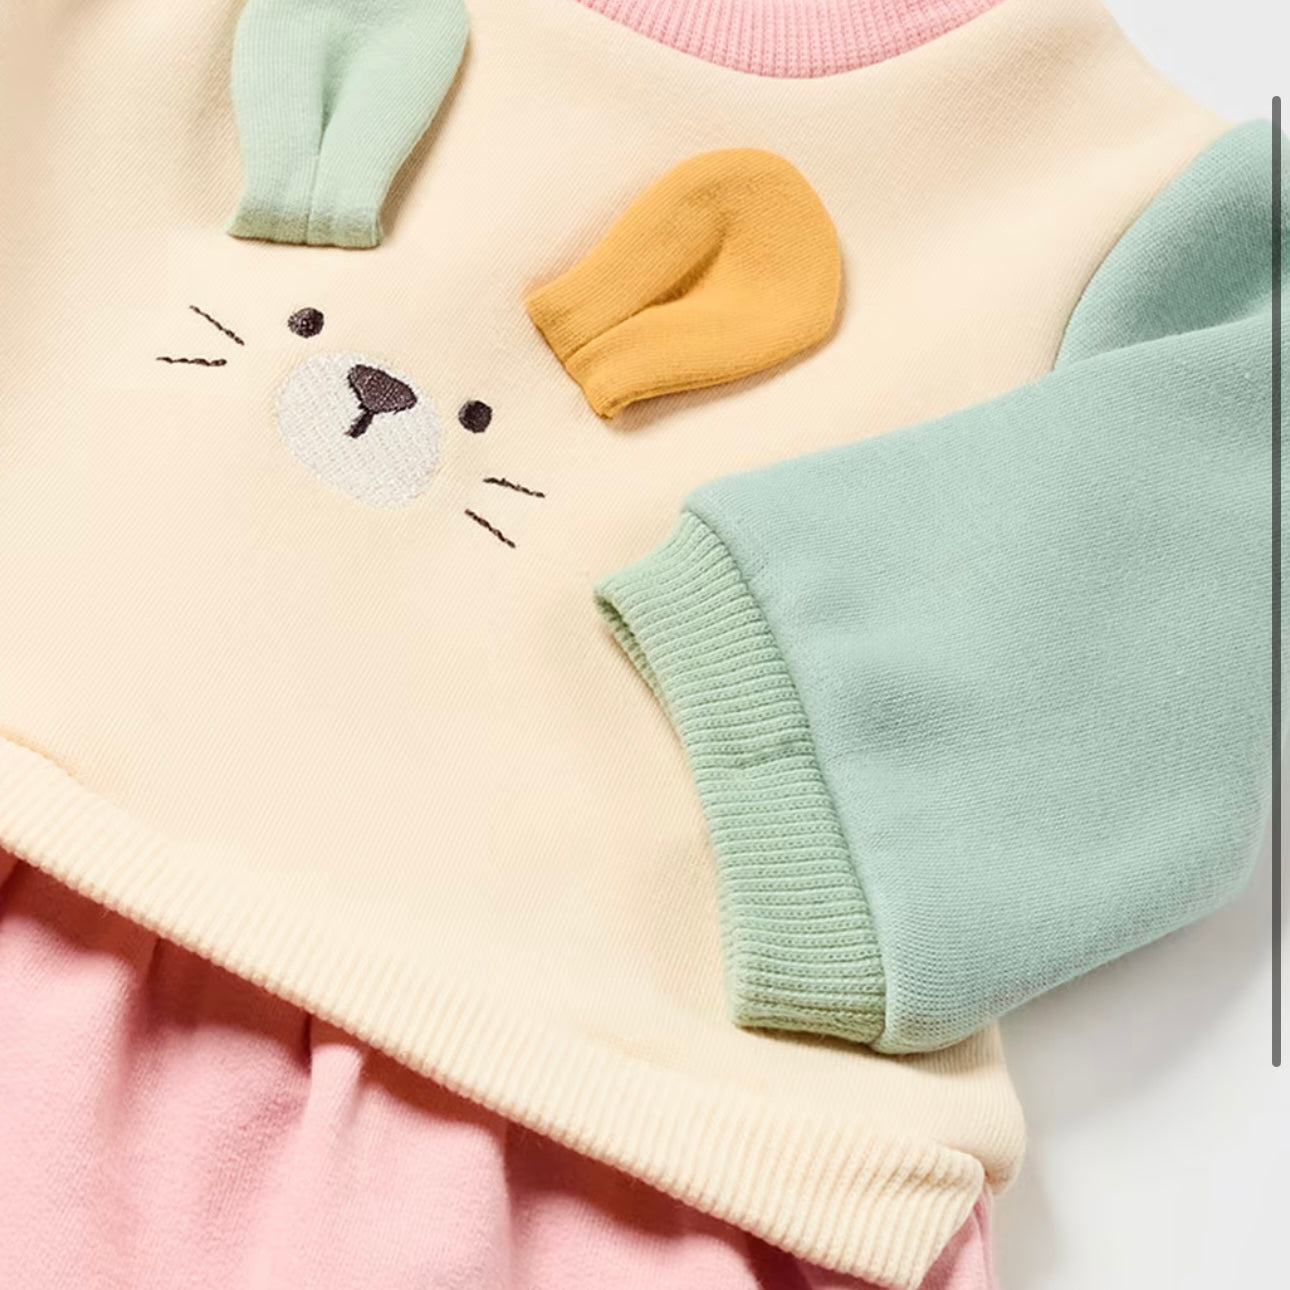 Candy Cotton Bunny Dress